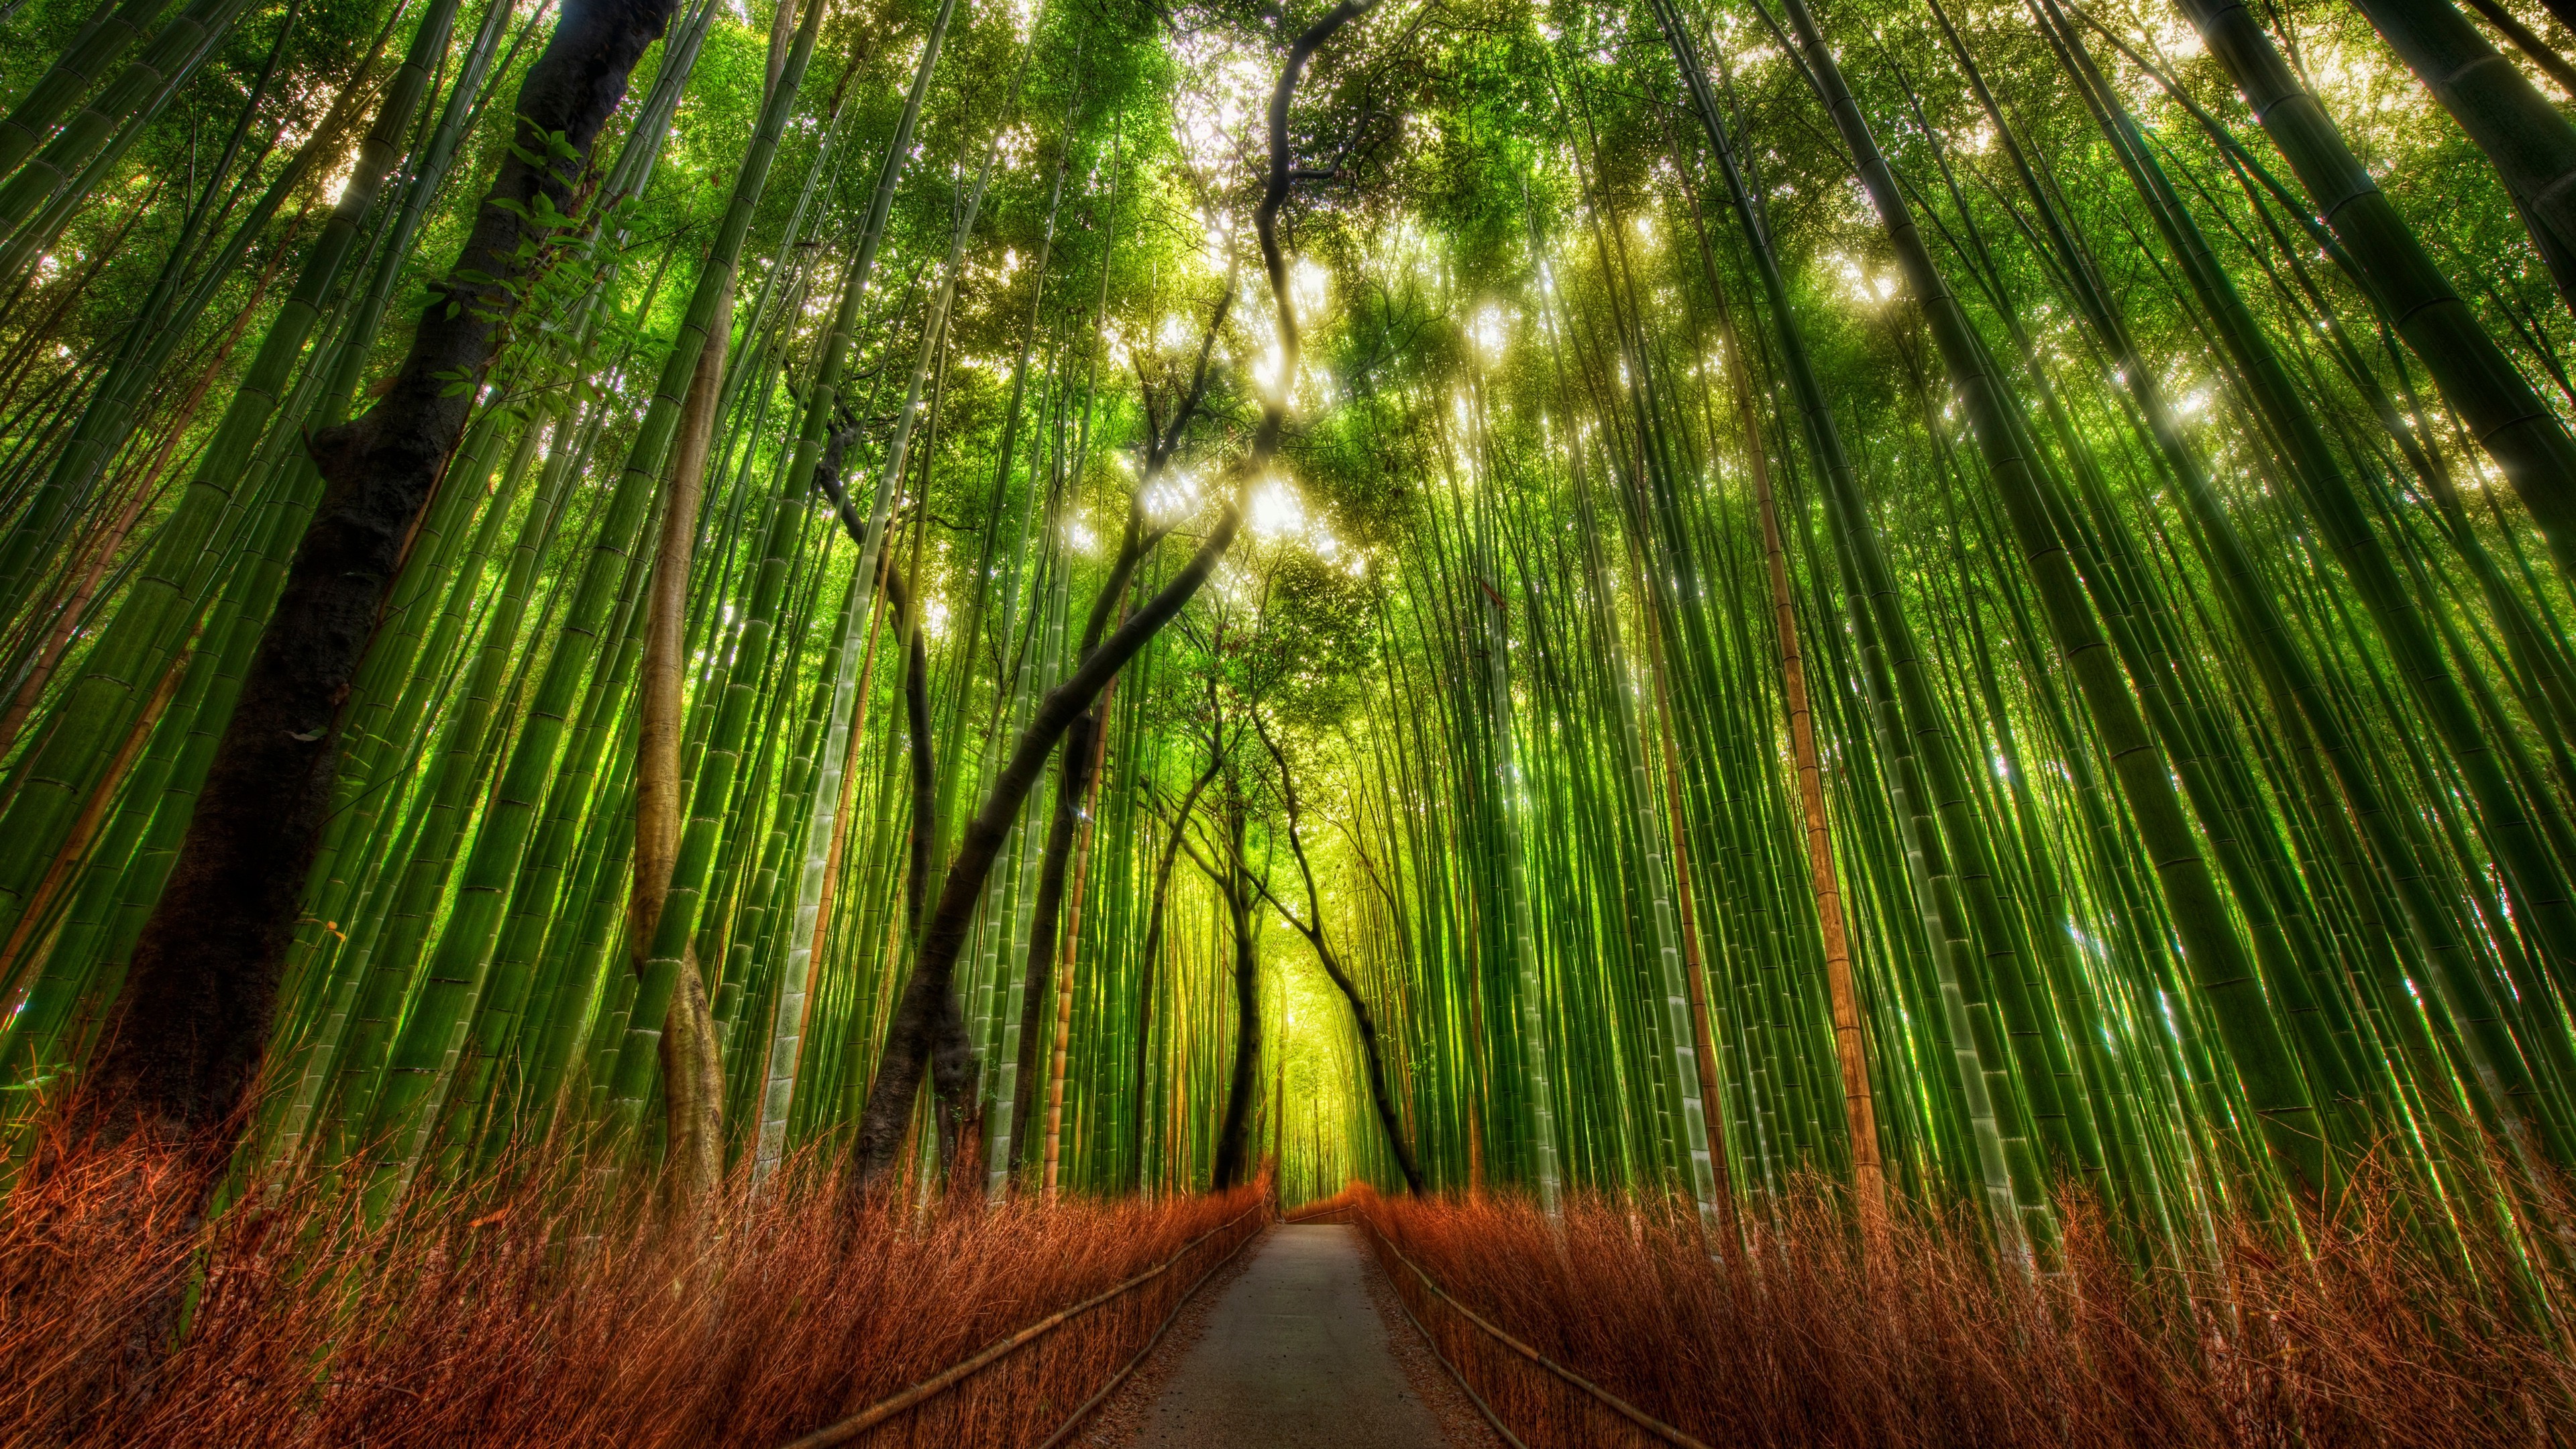  bamboo  Forest Wallpapers  HD Desktop and Mobile Backgrounds